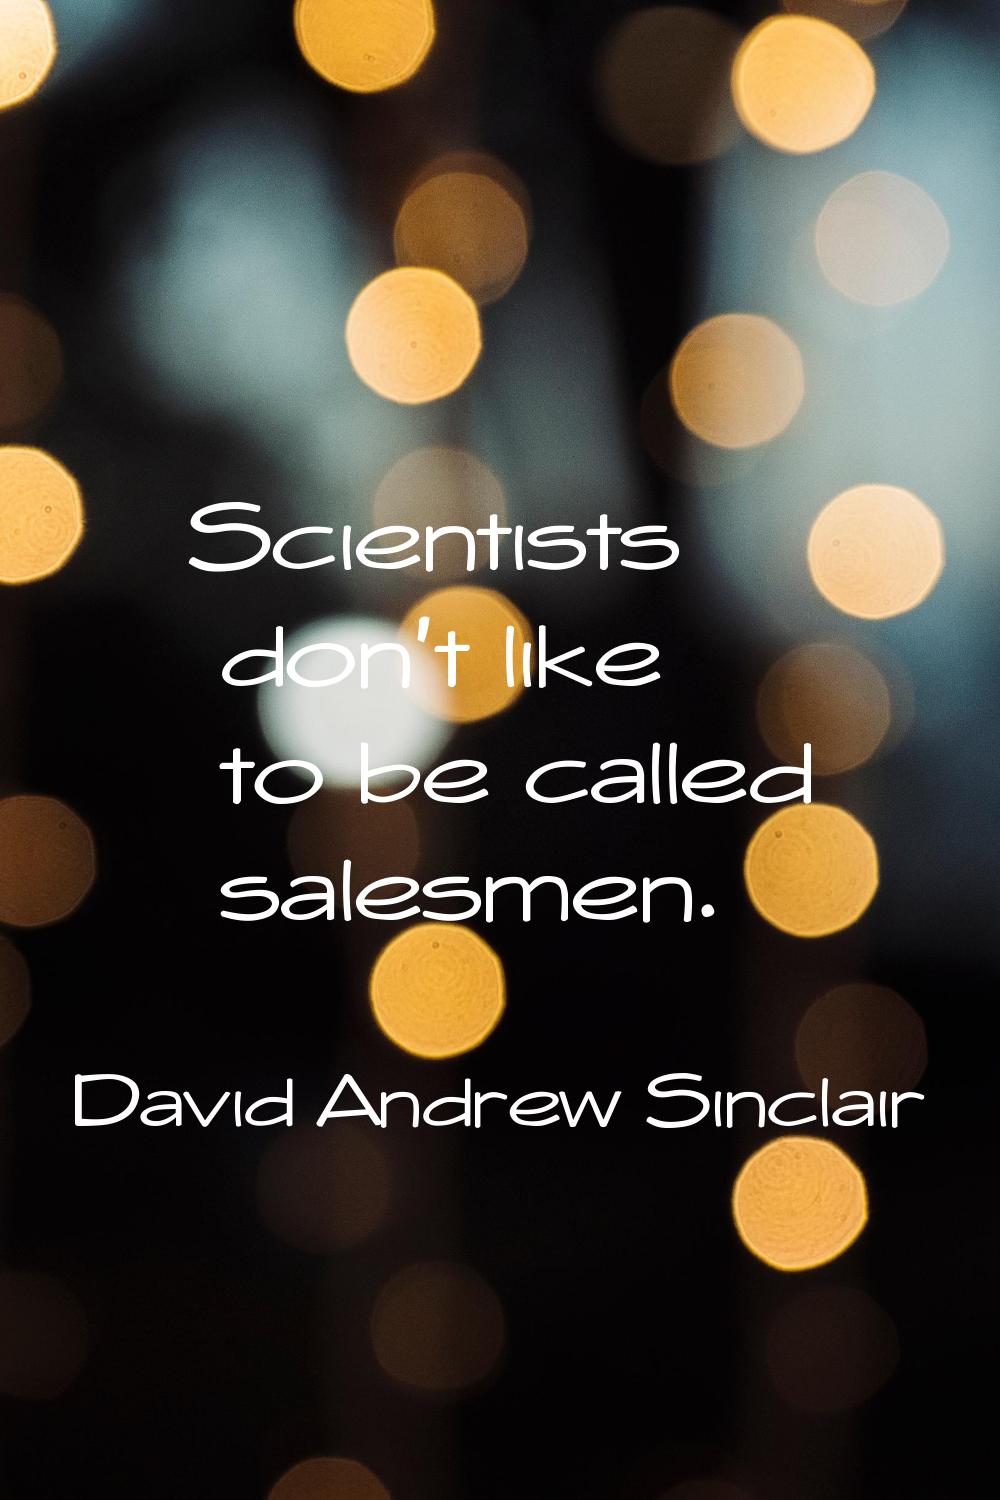 Scientists don't like to be called salesmen.